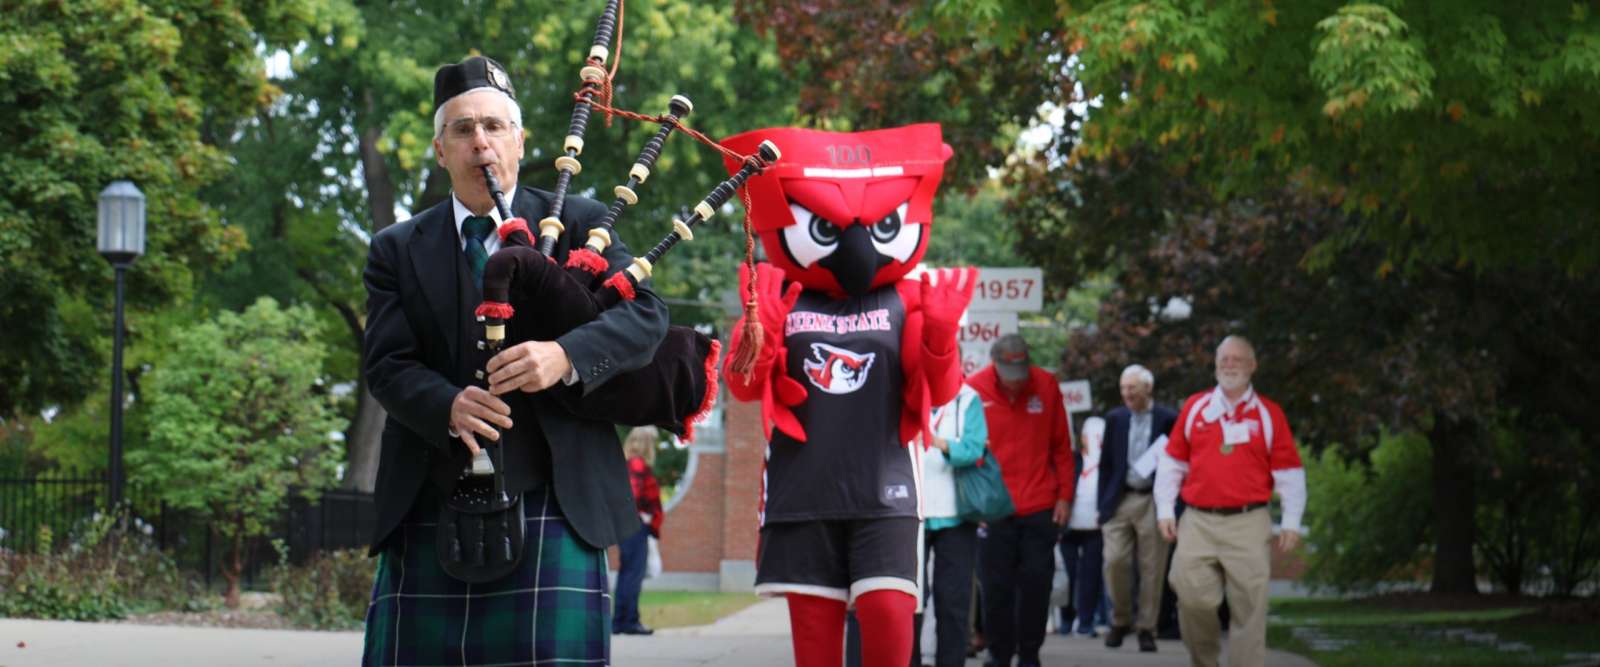 Homecoming: Hootie and Bagpipes